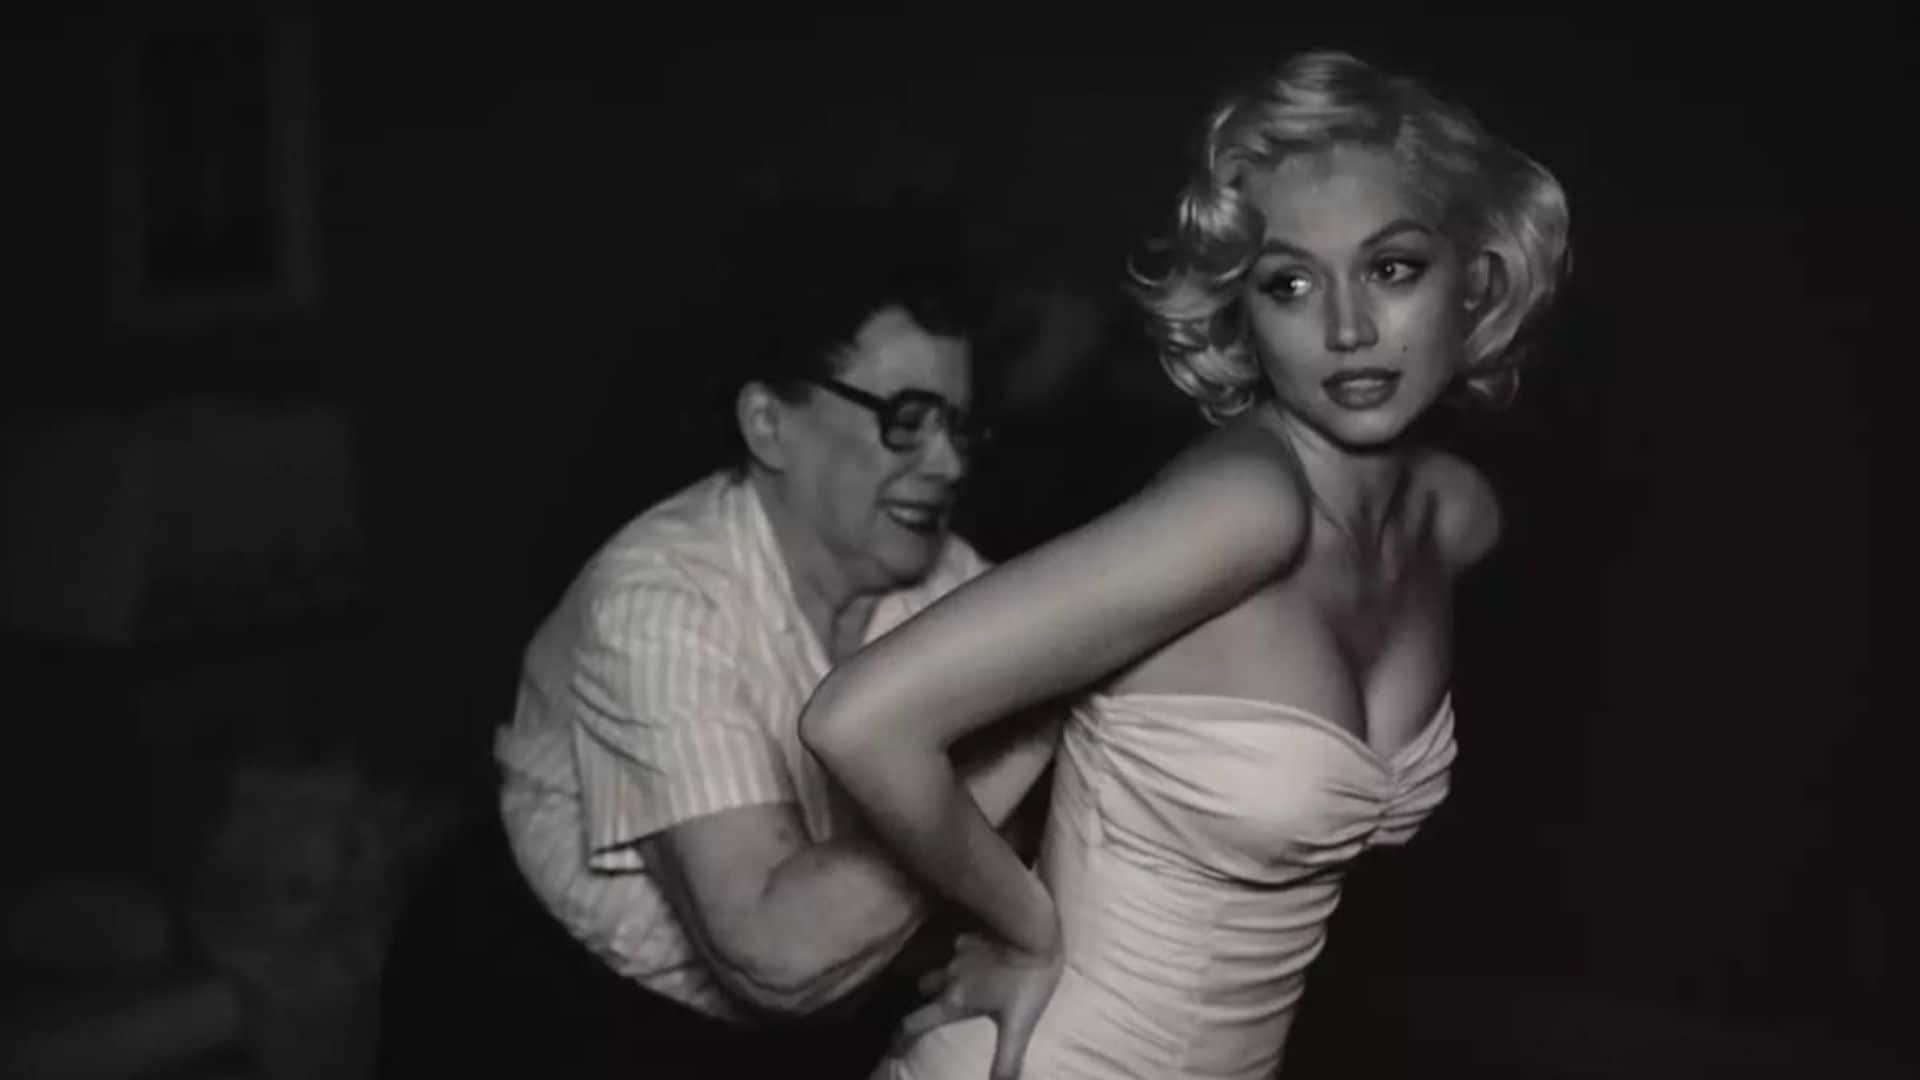 Ana de Armas shares behind-the-scenes snaps on the set of Marilyn Monroe’s upcoming biopic ‘Blonde’